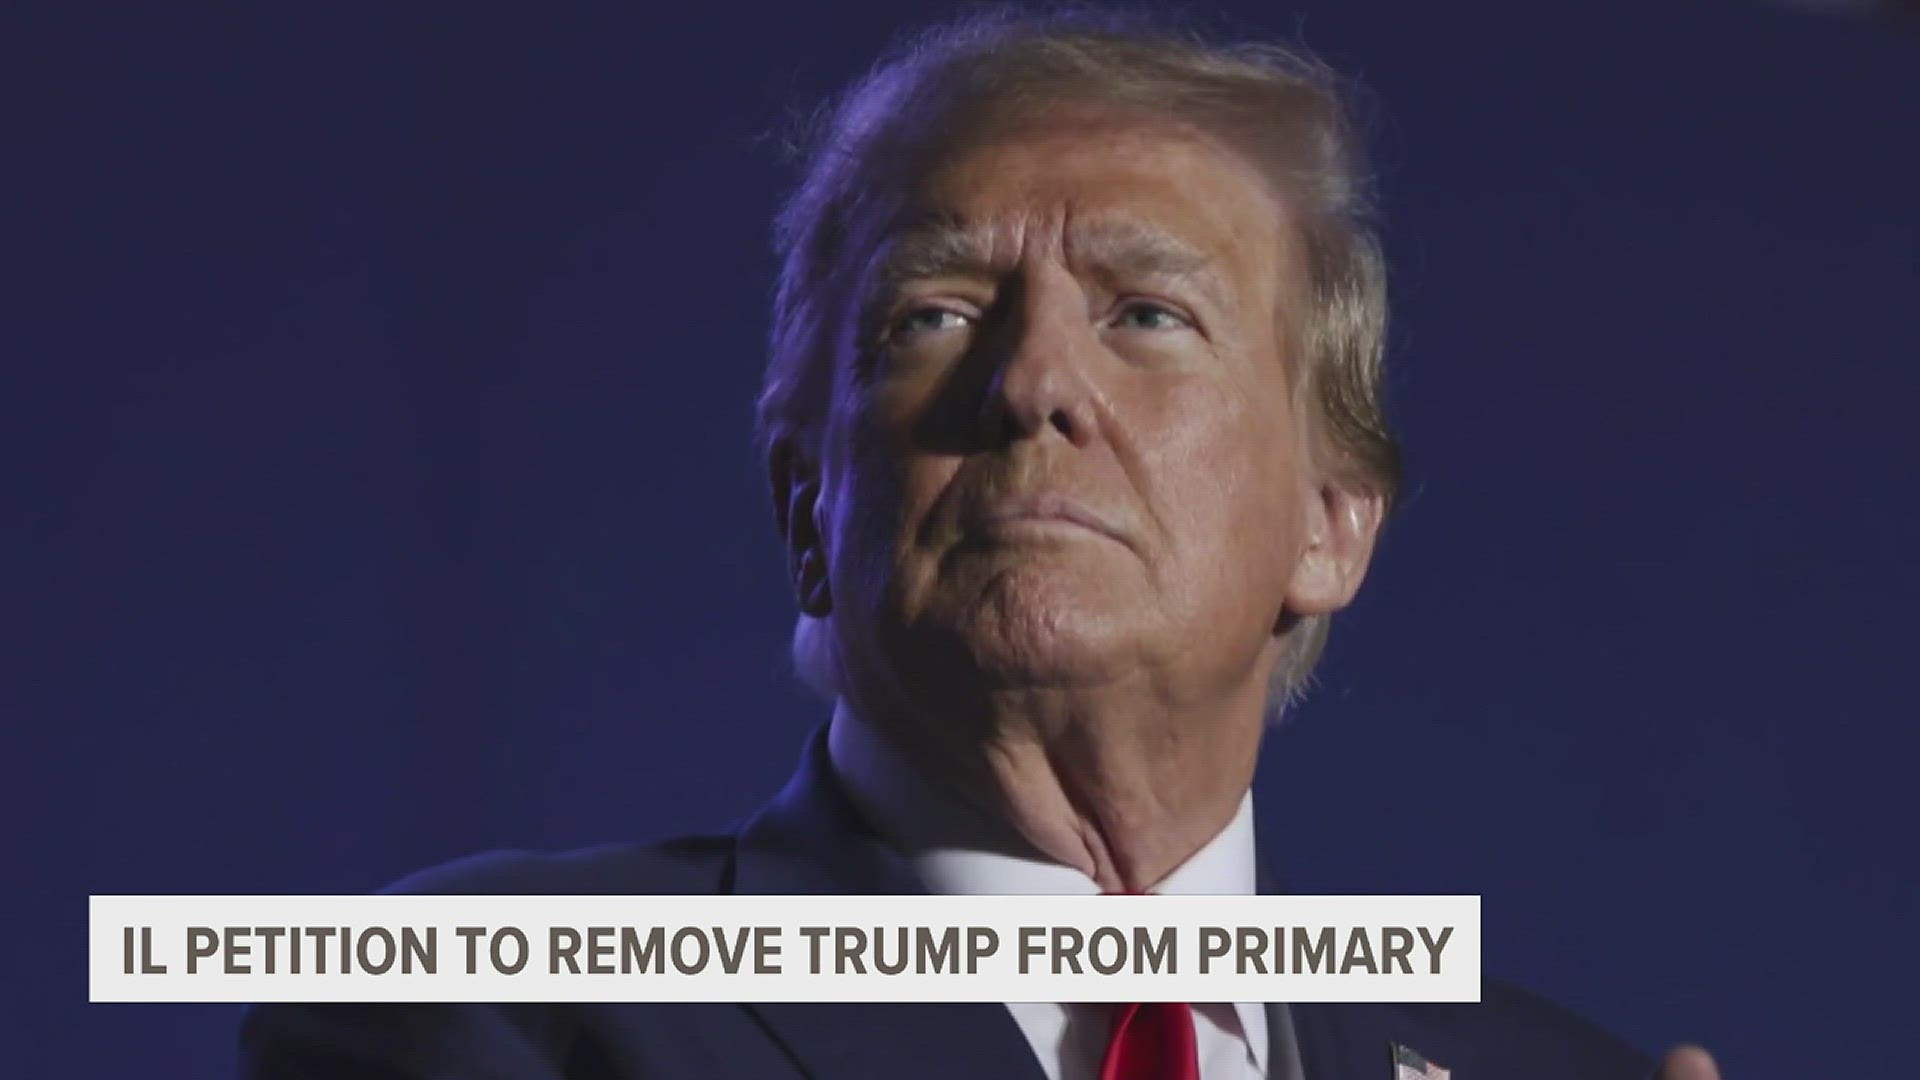 A petition filed by five voters seeks to bar former President Donald Trump from the Illinois Republican primary election ballot in March.